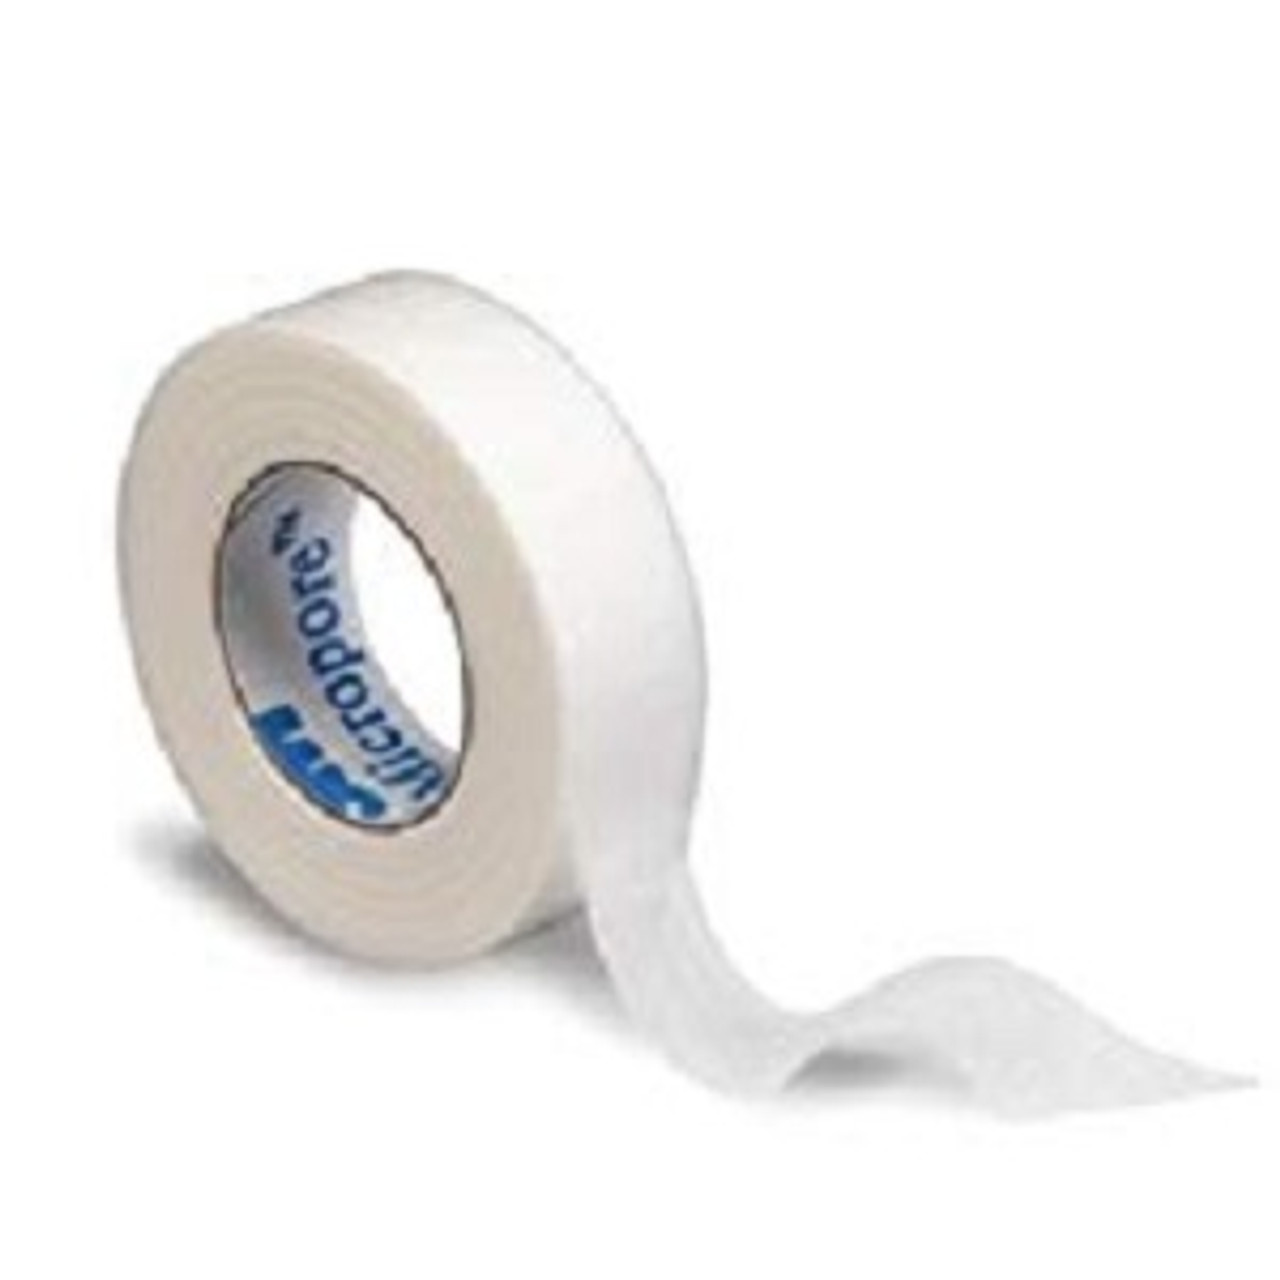 3M Micropore Surgical Tape, 1 X 10 Yards, 1530-1, 1 Roll